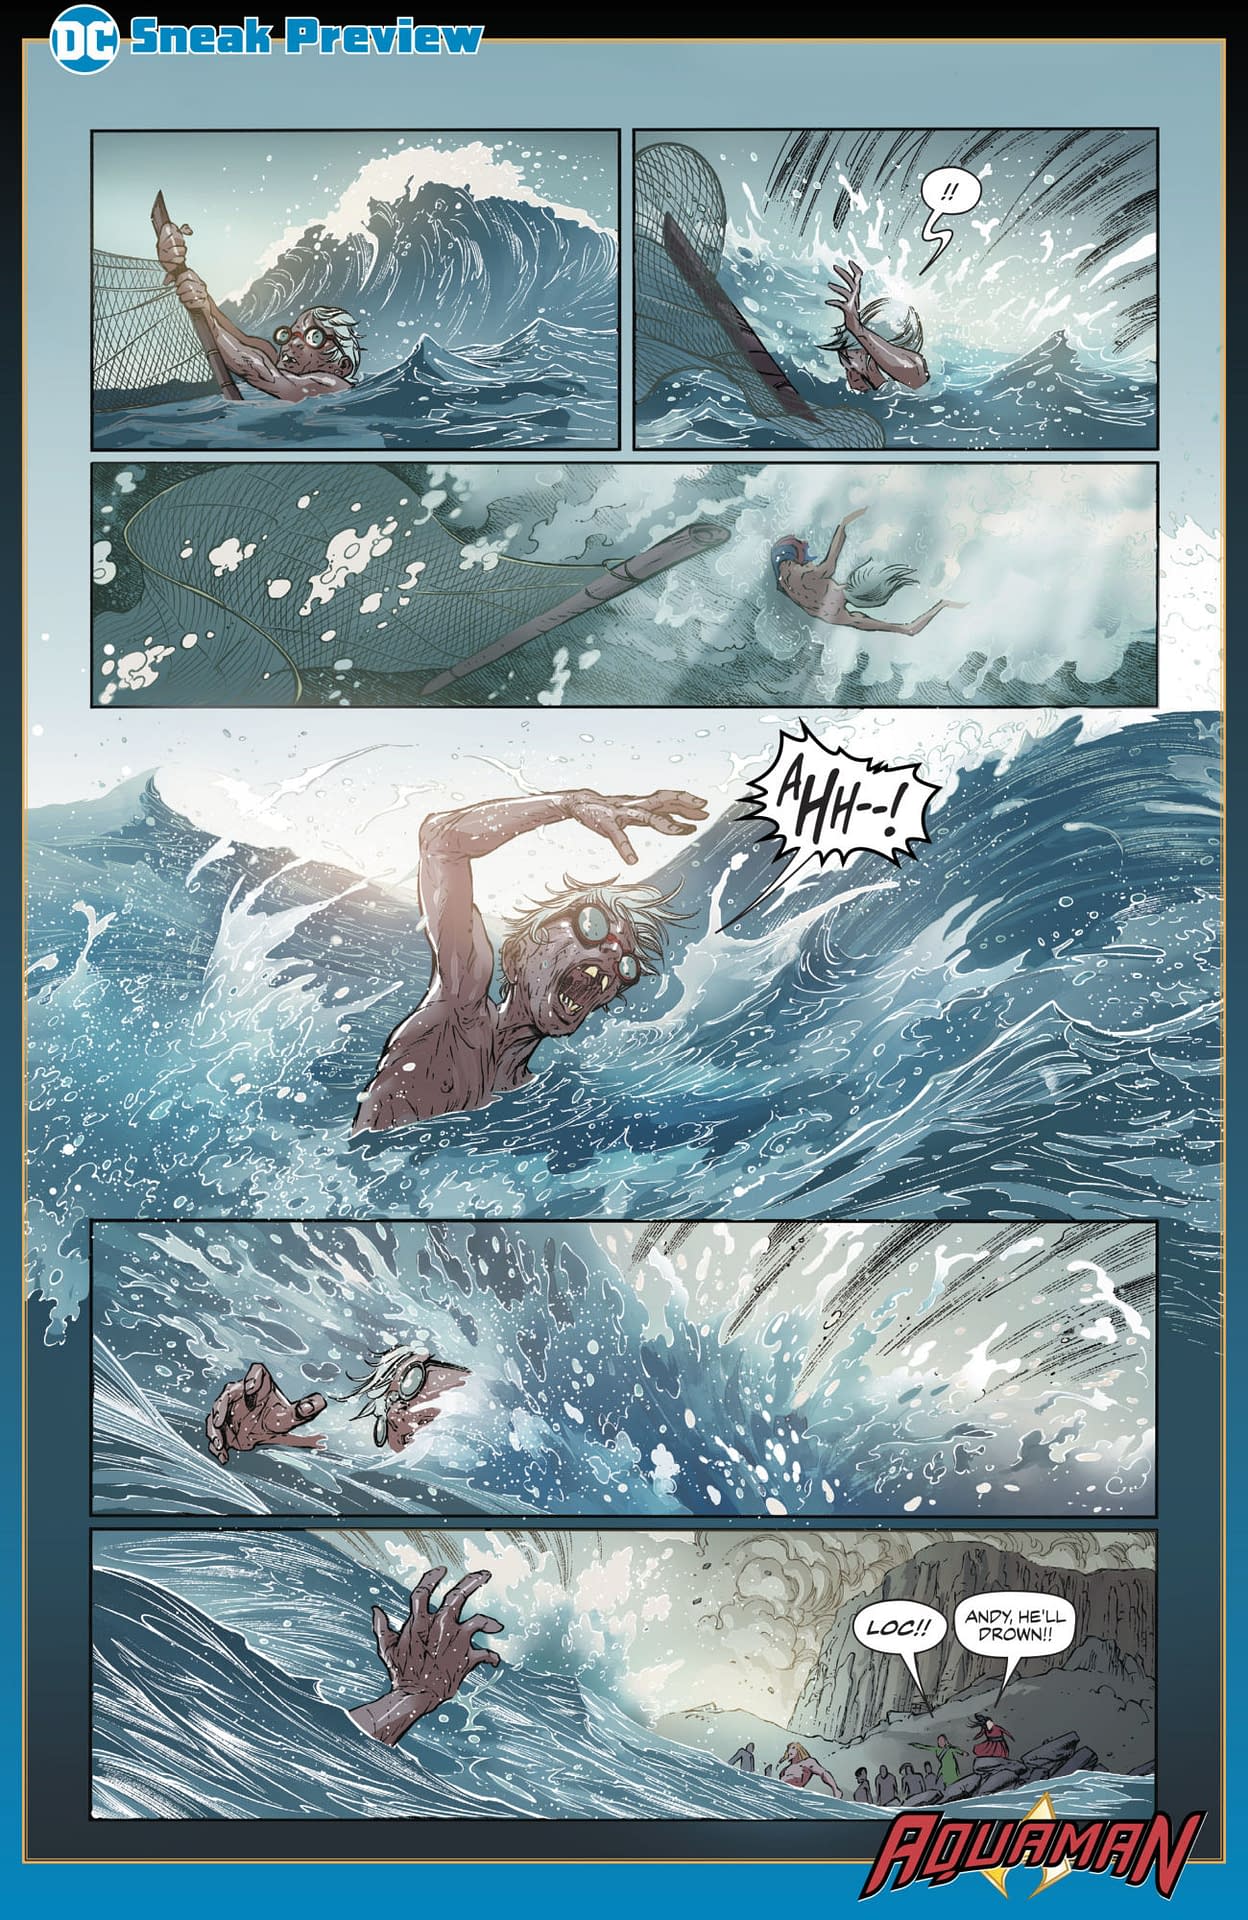 How Drowned Earth Finale Sets Up Kelly Sue DeConnick and Robson Rocha's Aquaman #43